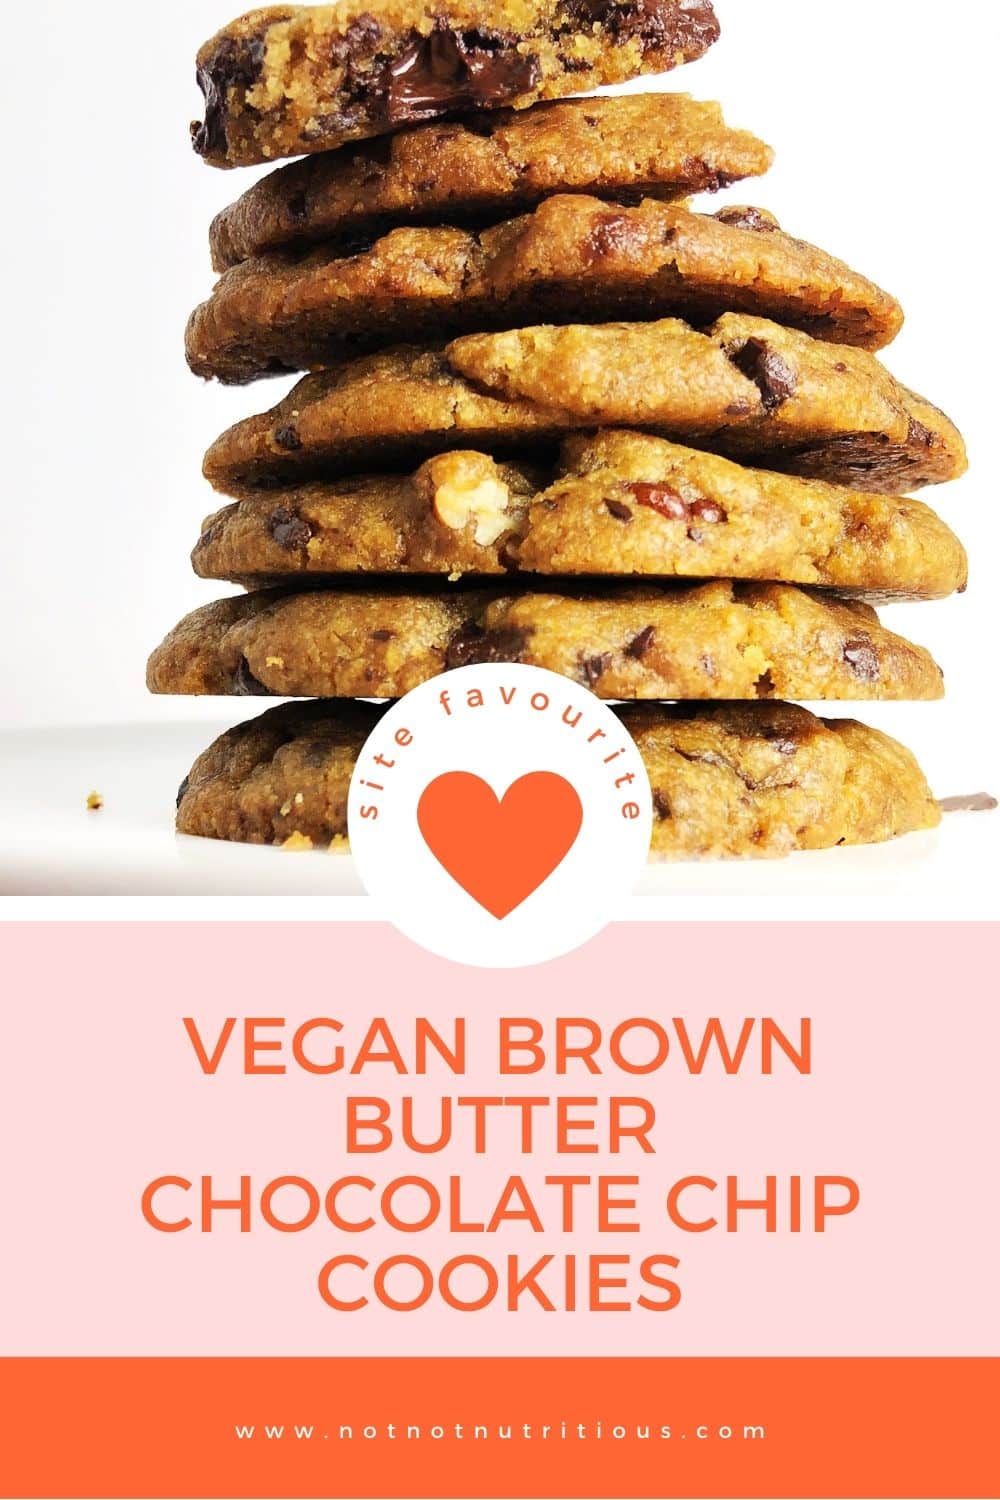 Pinterest pin showing a stack of Vegan Brown Butter Chocolate Chip Cookies against a white background